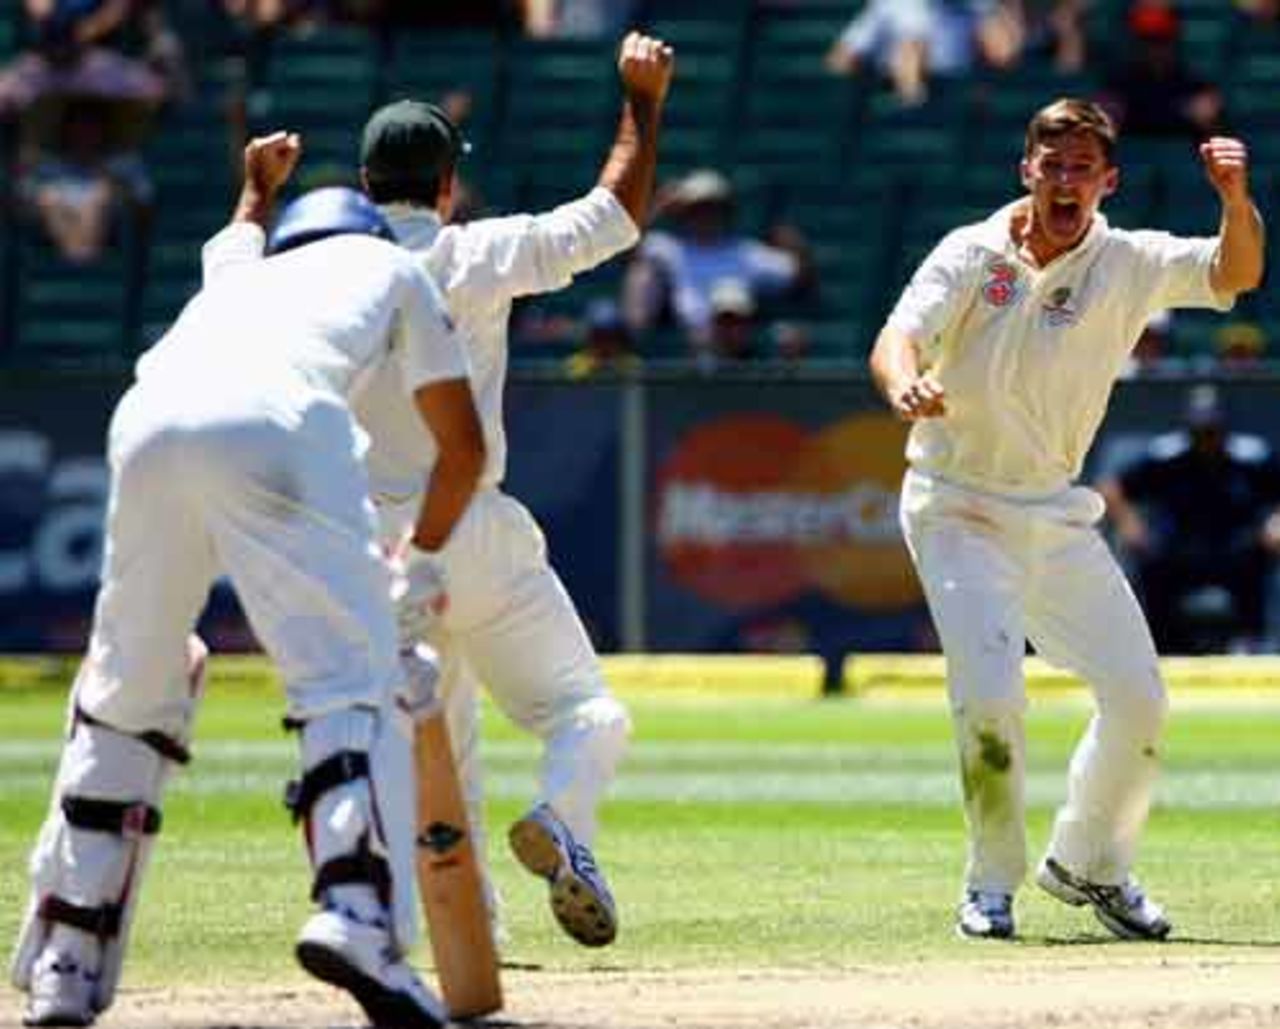 Brad Hogg celebrates after trapping Yuvraj Singh in front, Australia v India, 1st Test, Melbourne, 4th day, December 29, 2007